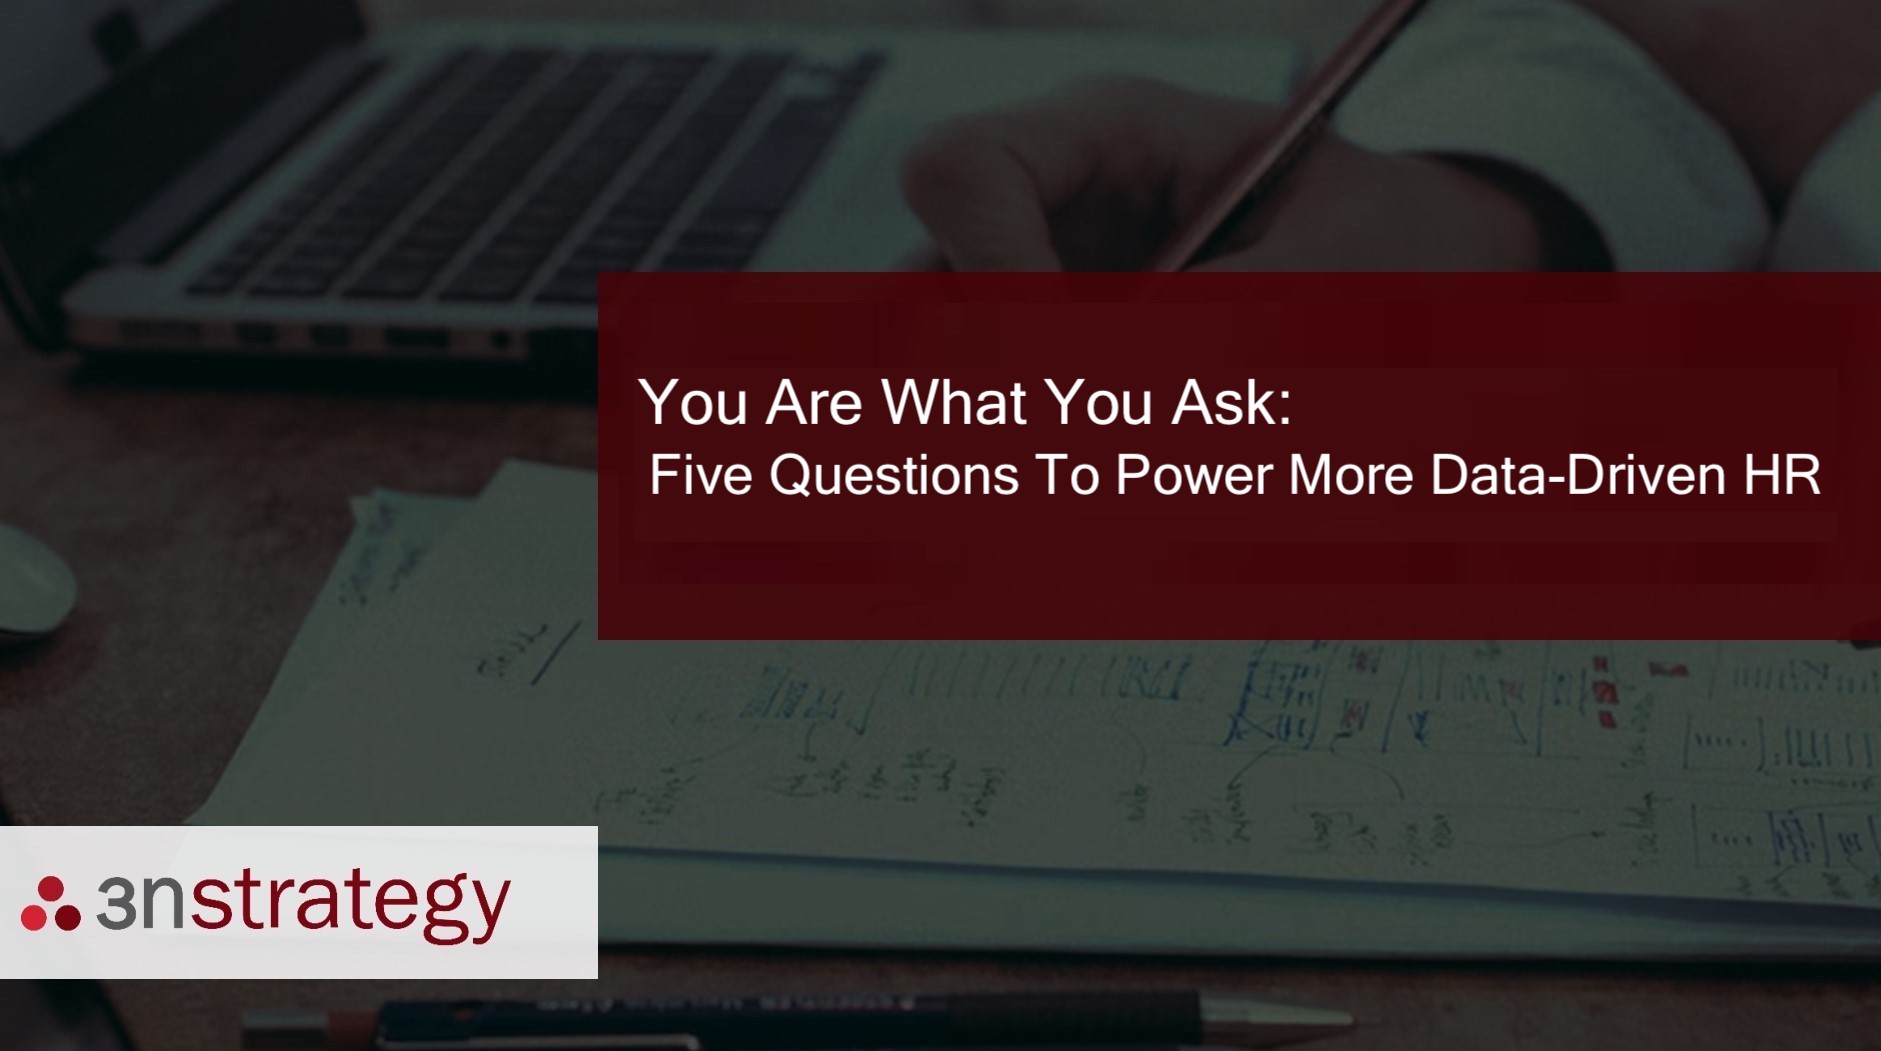 Five Questions For More Data-Driven HR